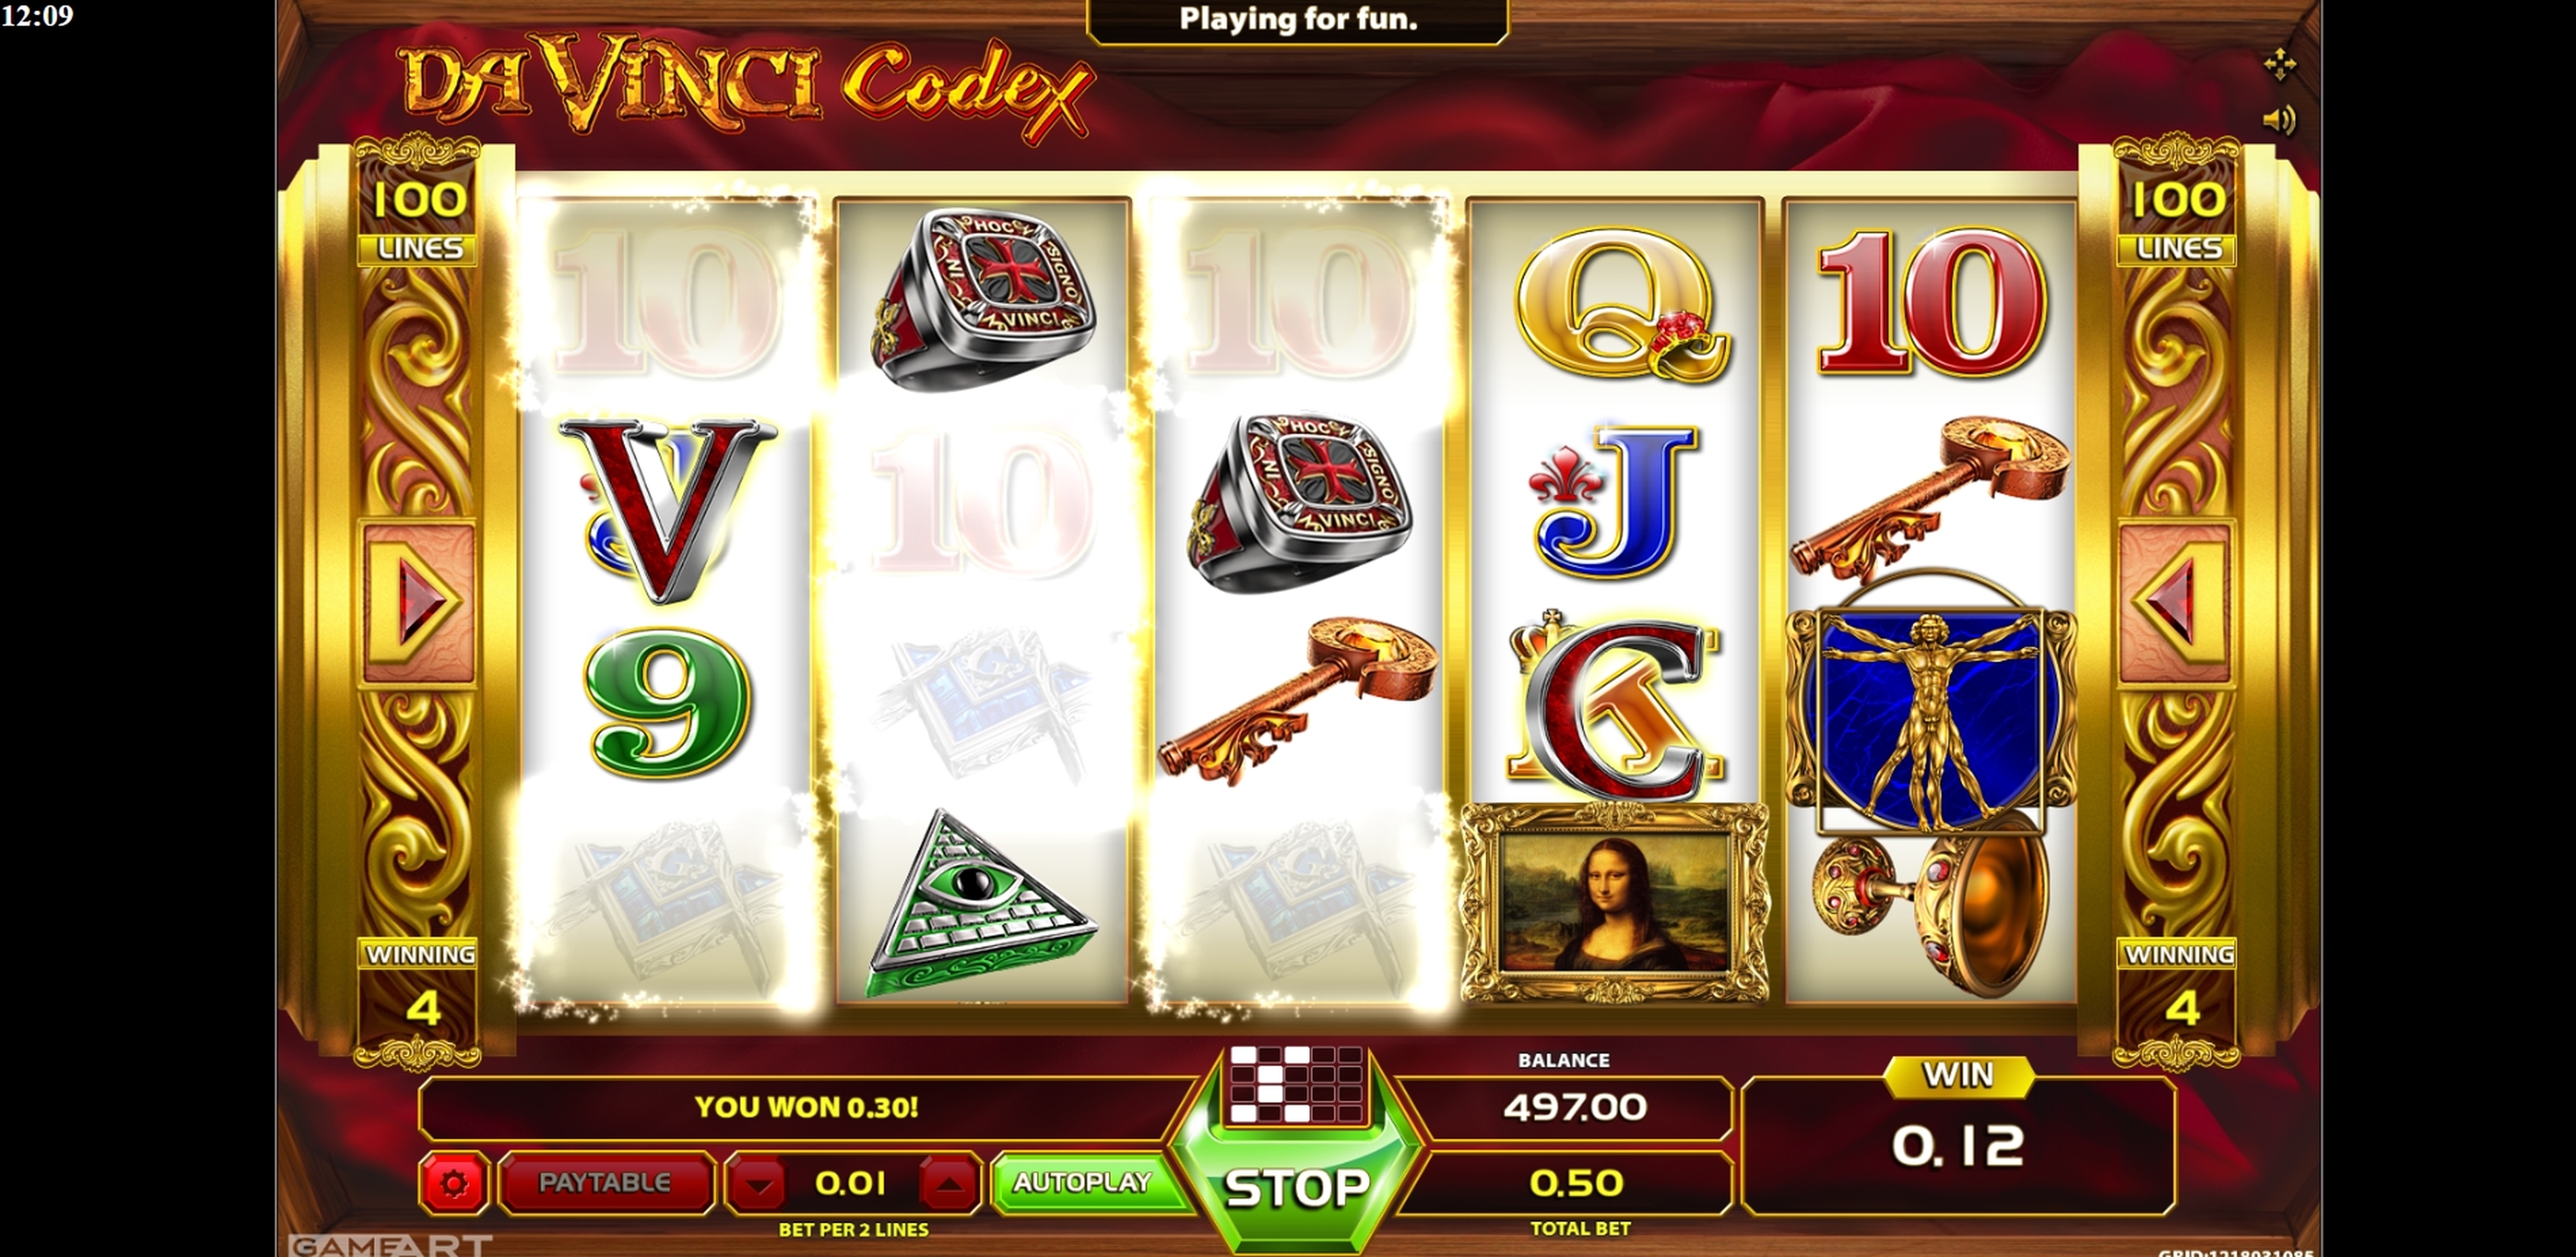 Win Money in DaVinci Codex Free Slot Game by GameArt